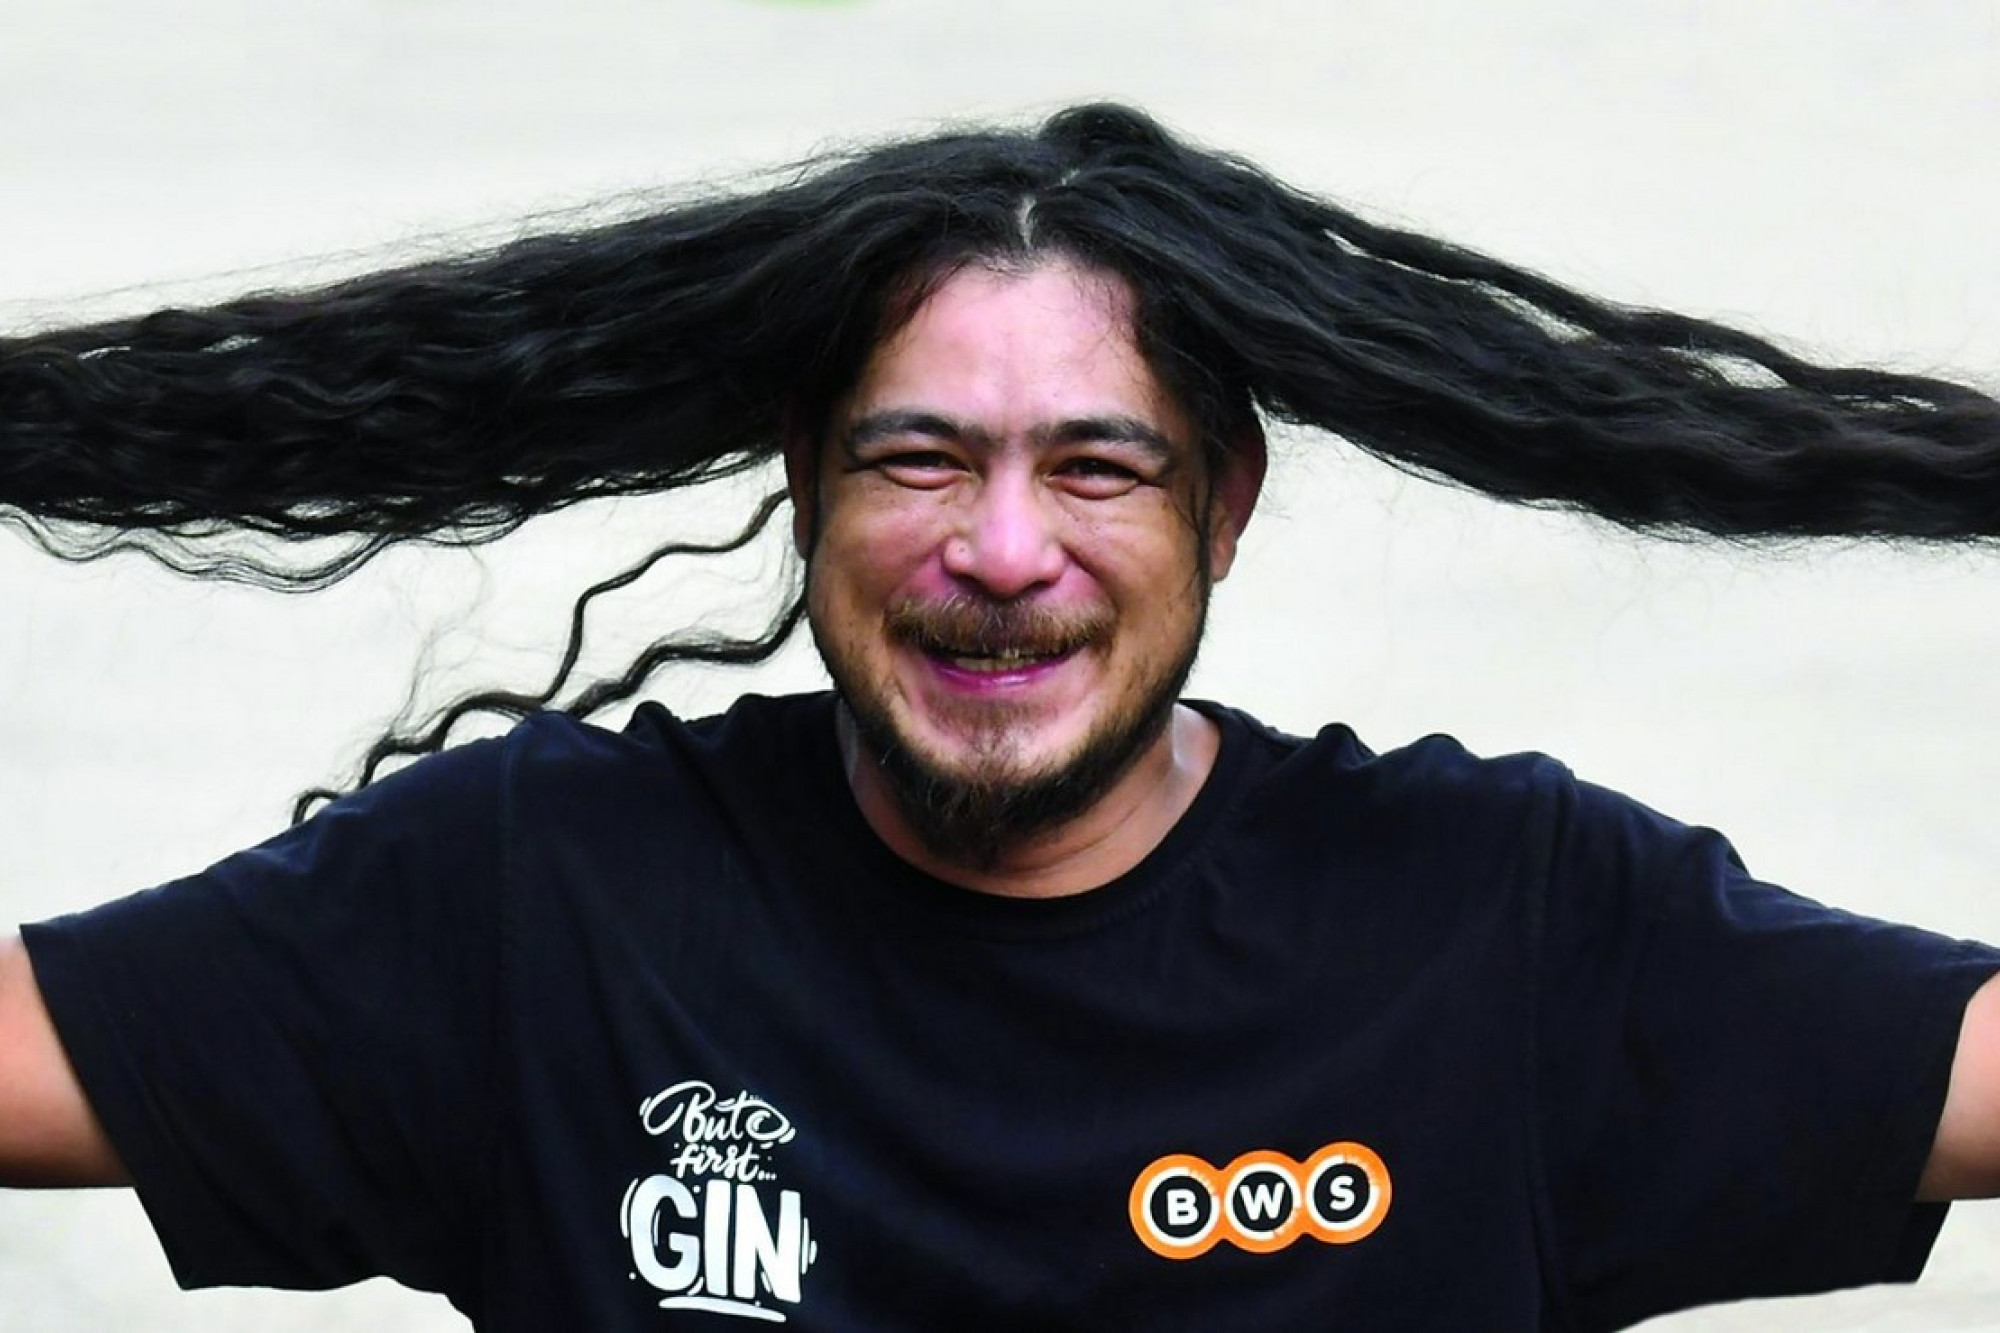 Takuro to shave for a cure - feature photo